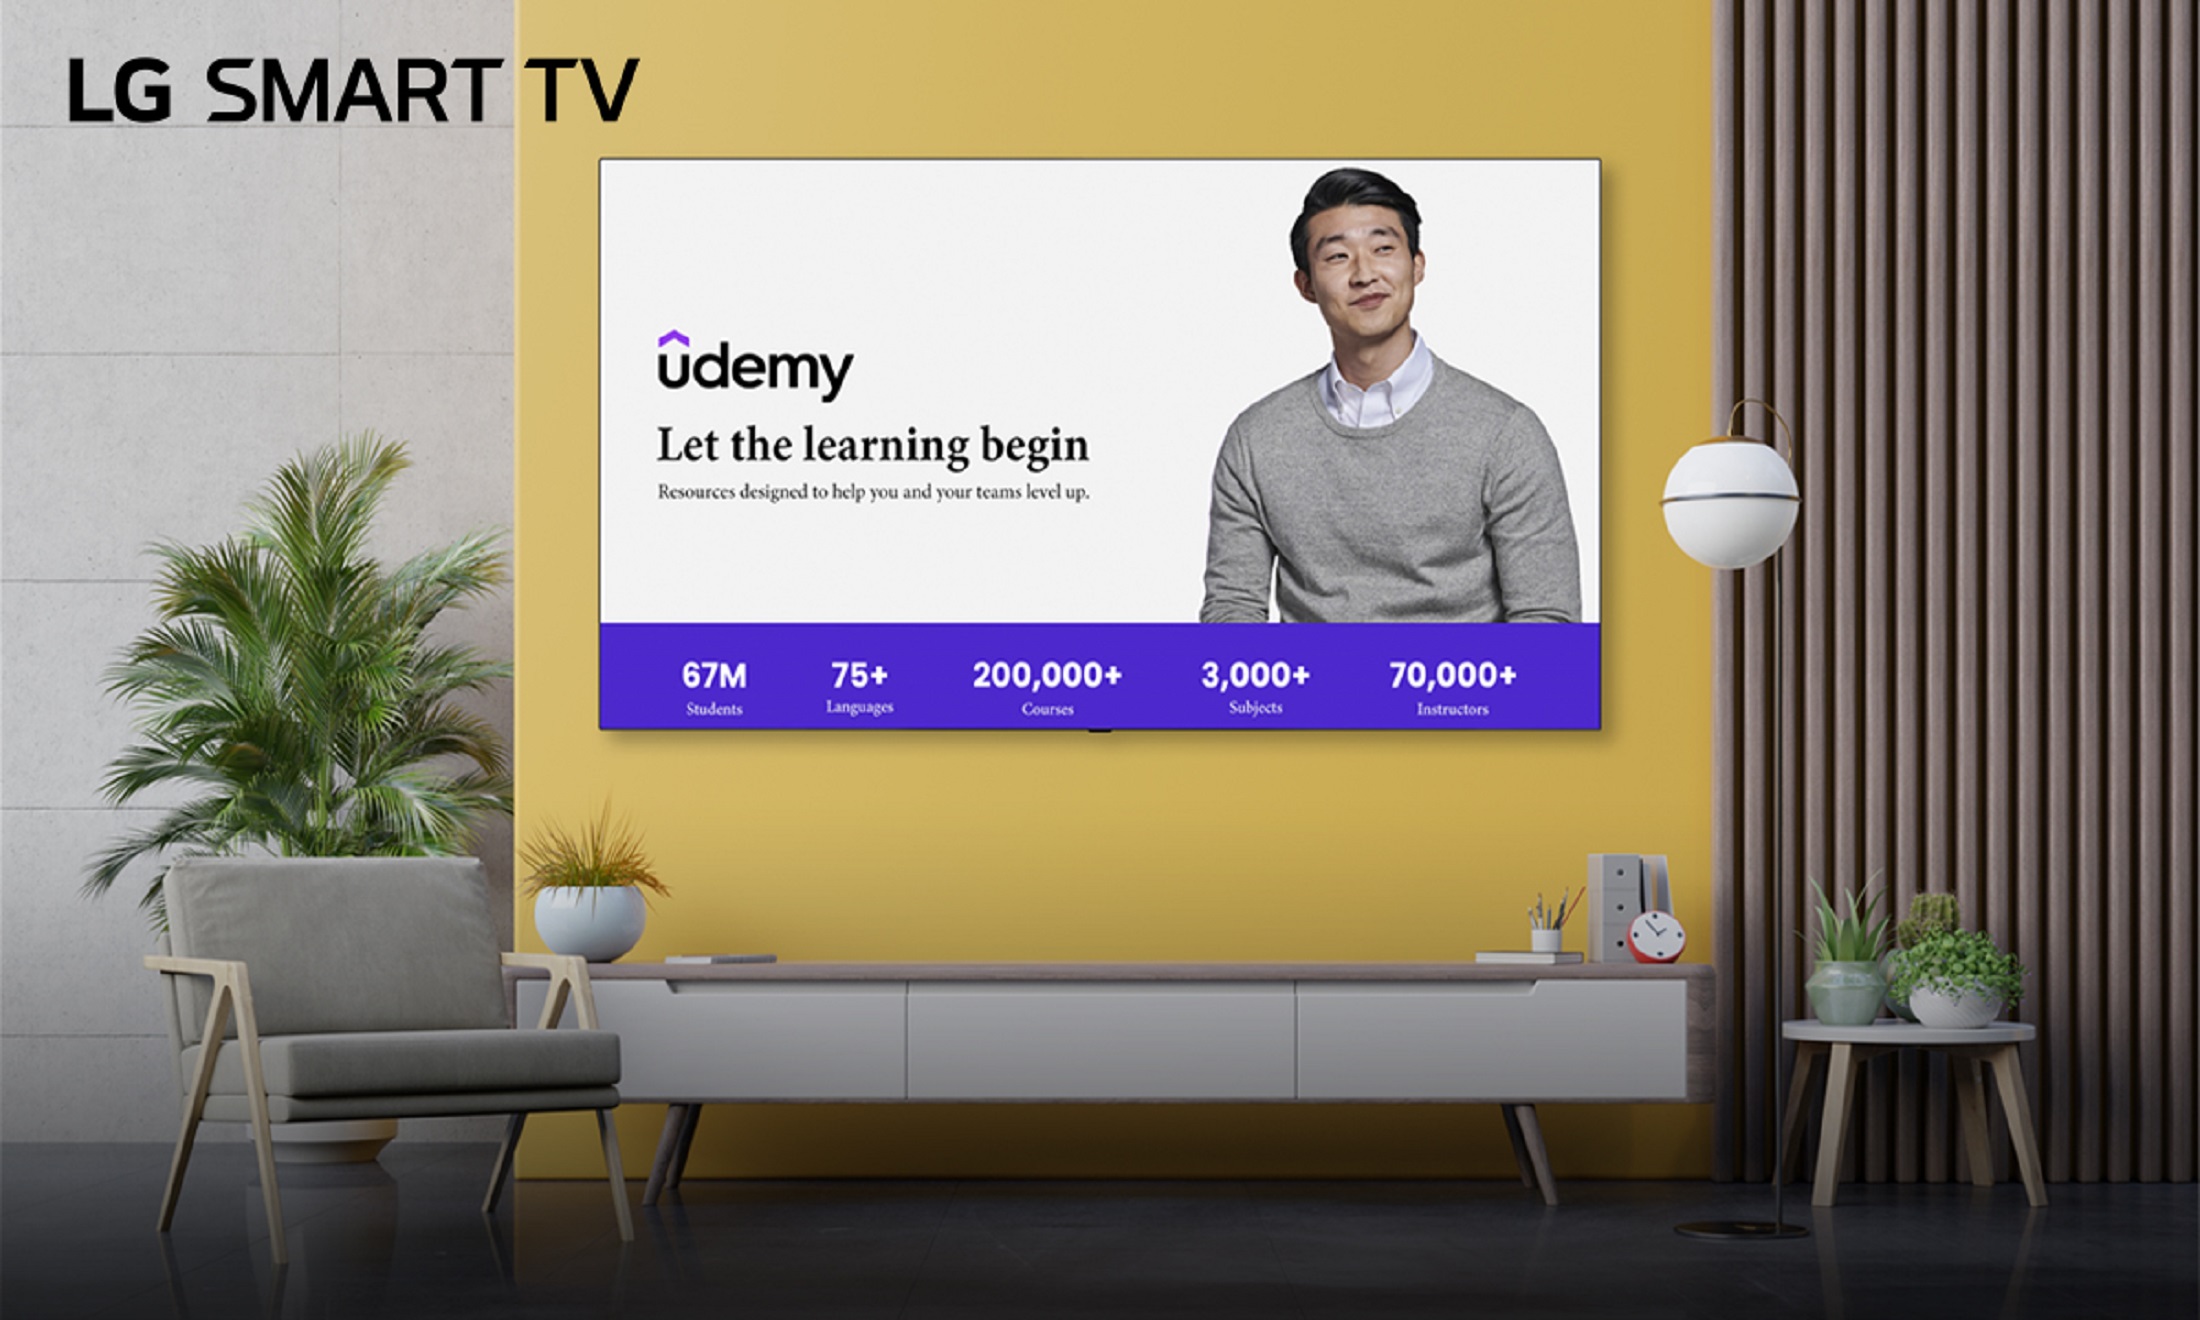 A wall-mounted LG Smart TV displays Udemy’s home screen